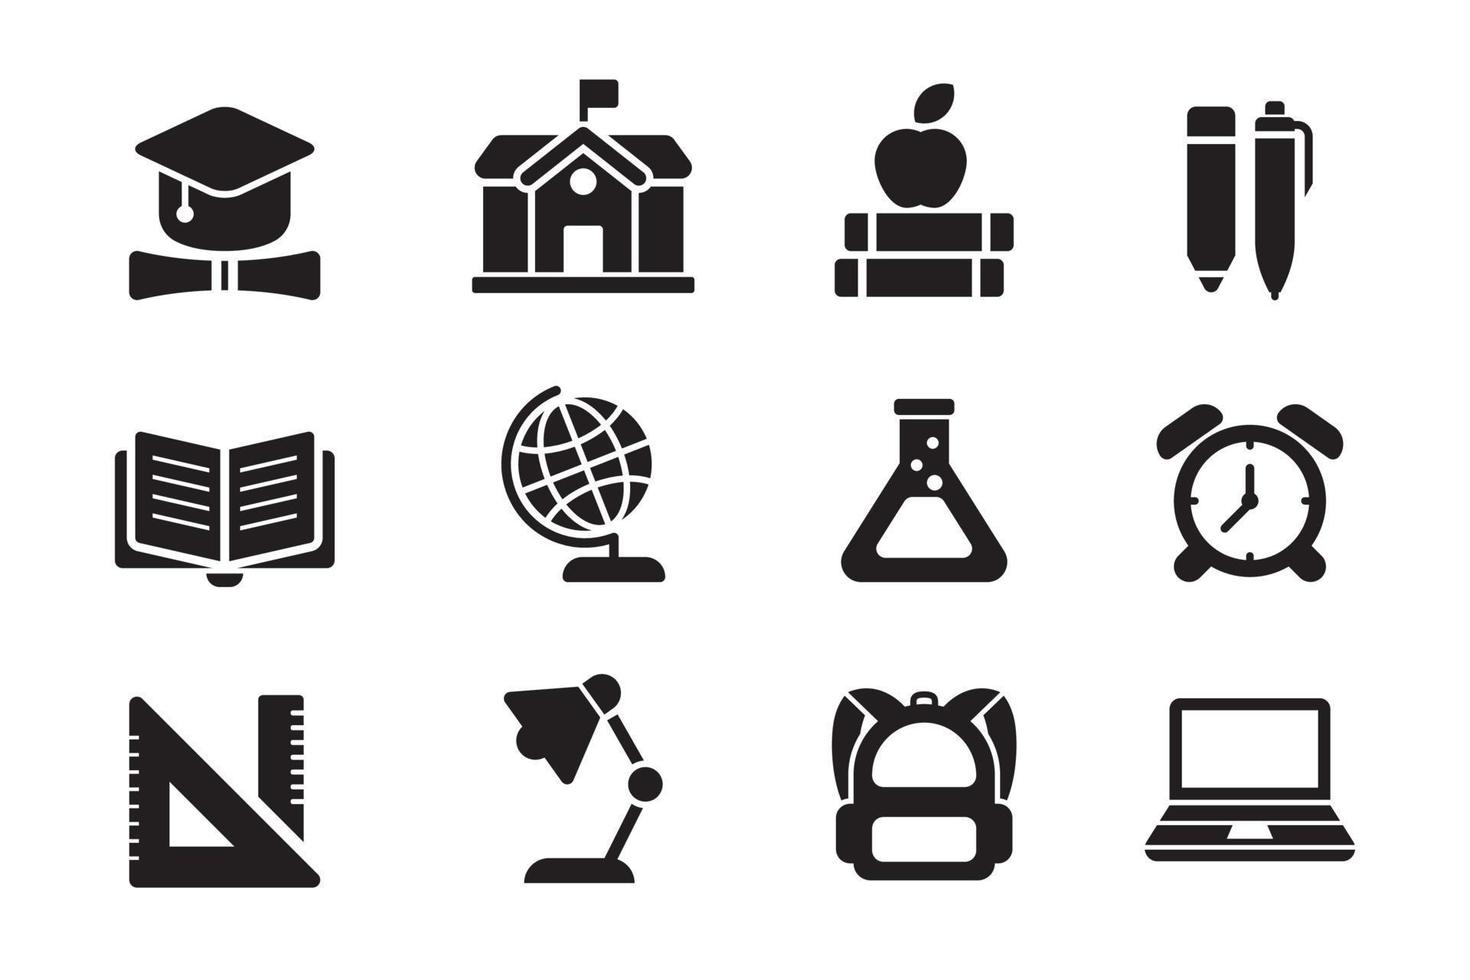 School and education icons in black style isolated on white background vector